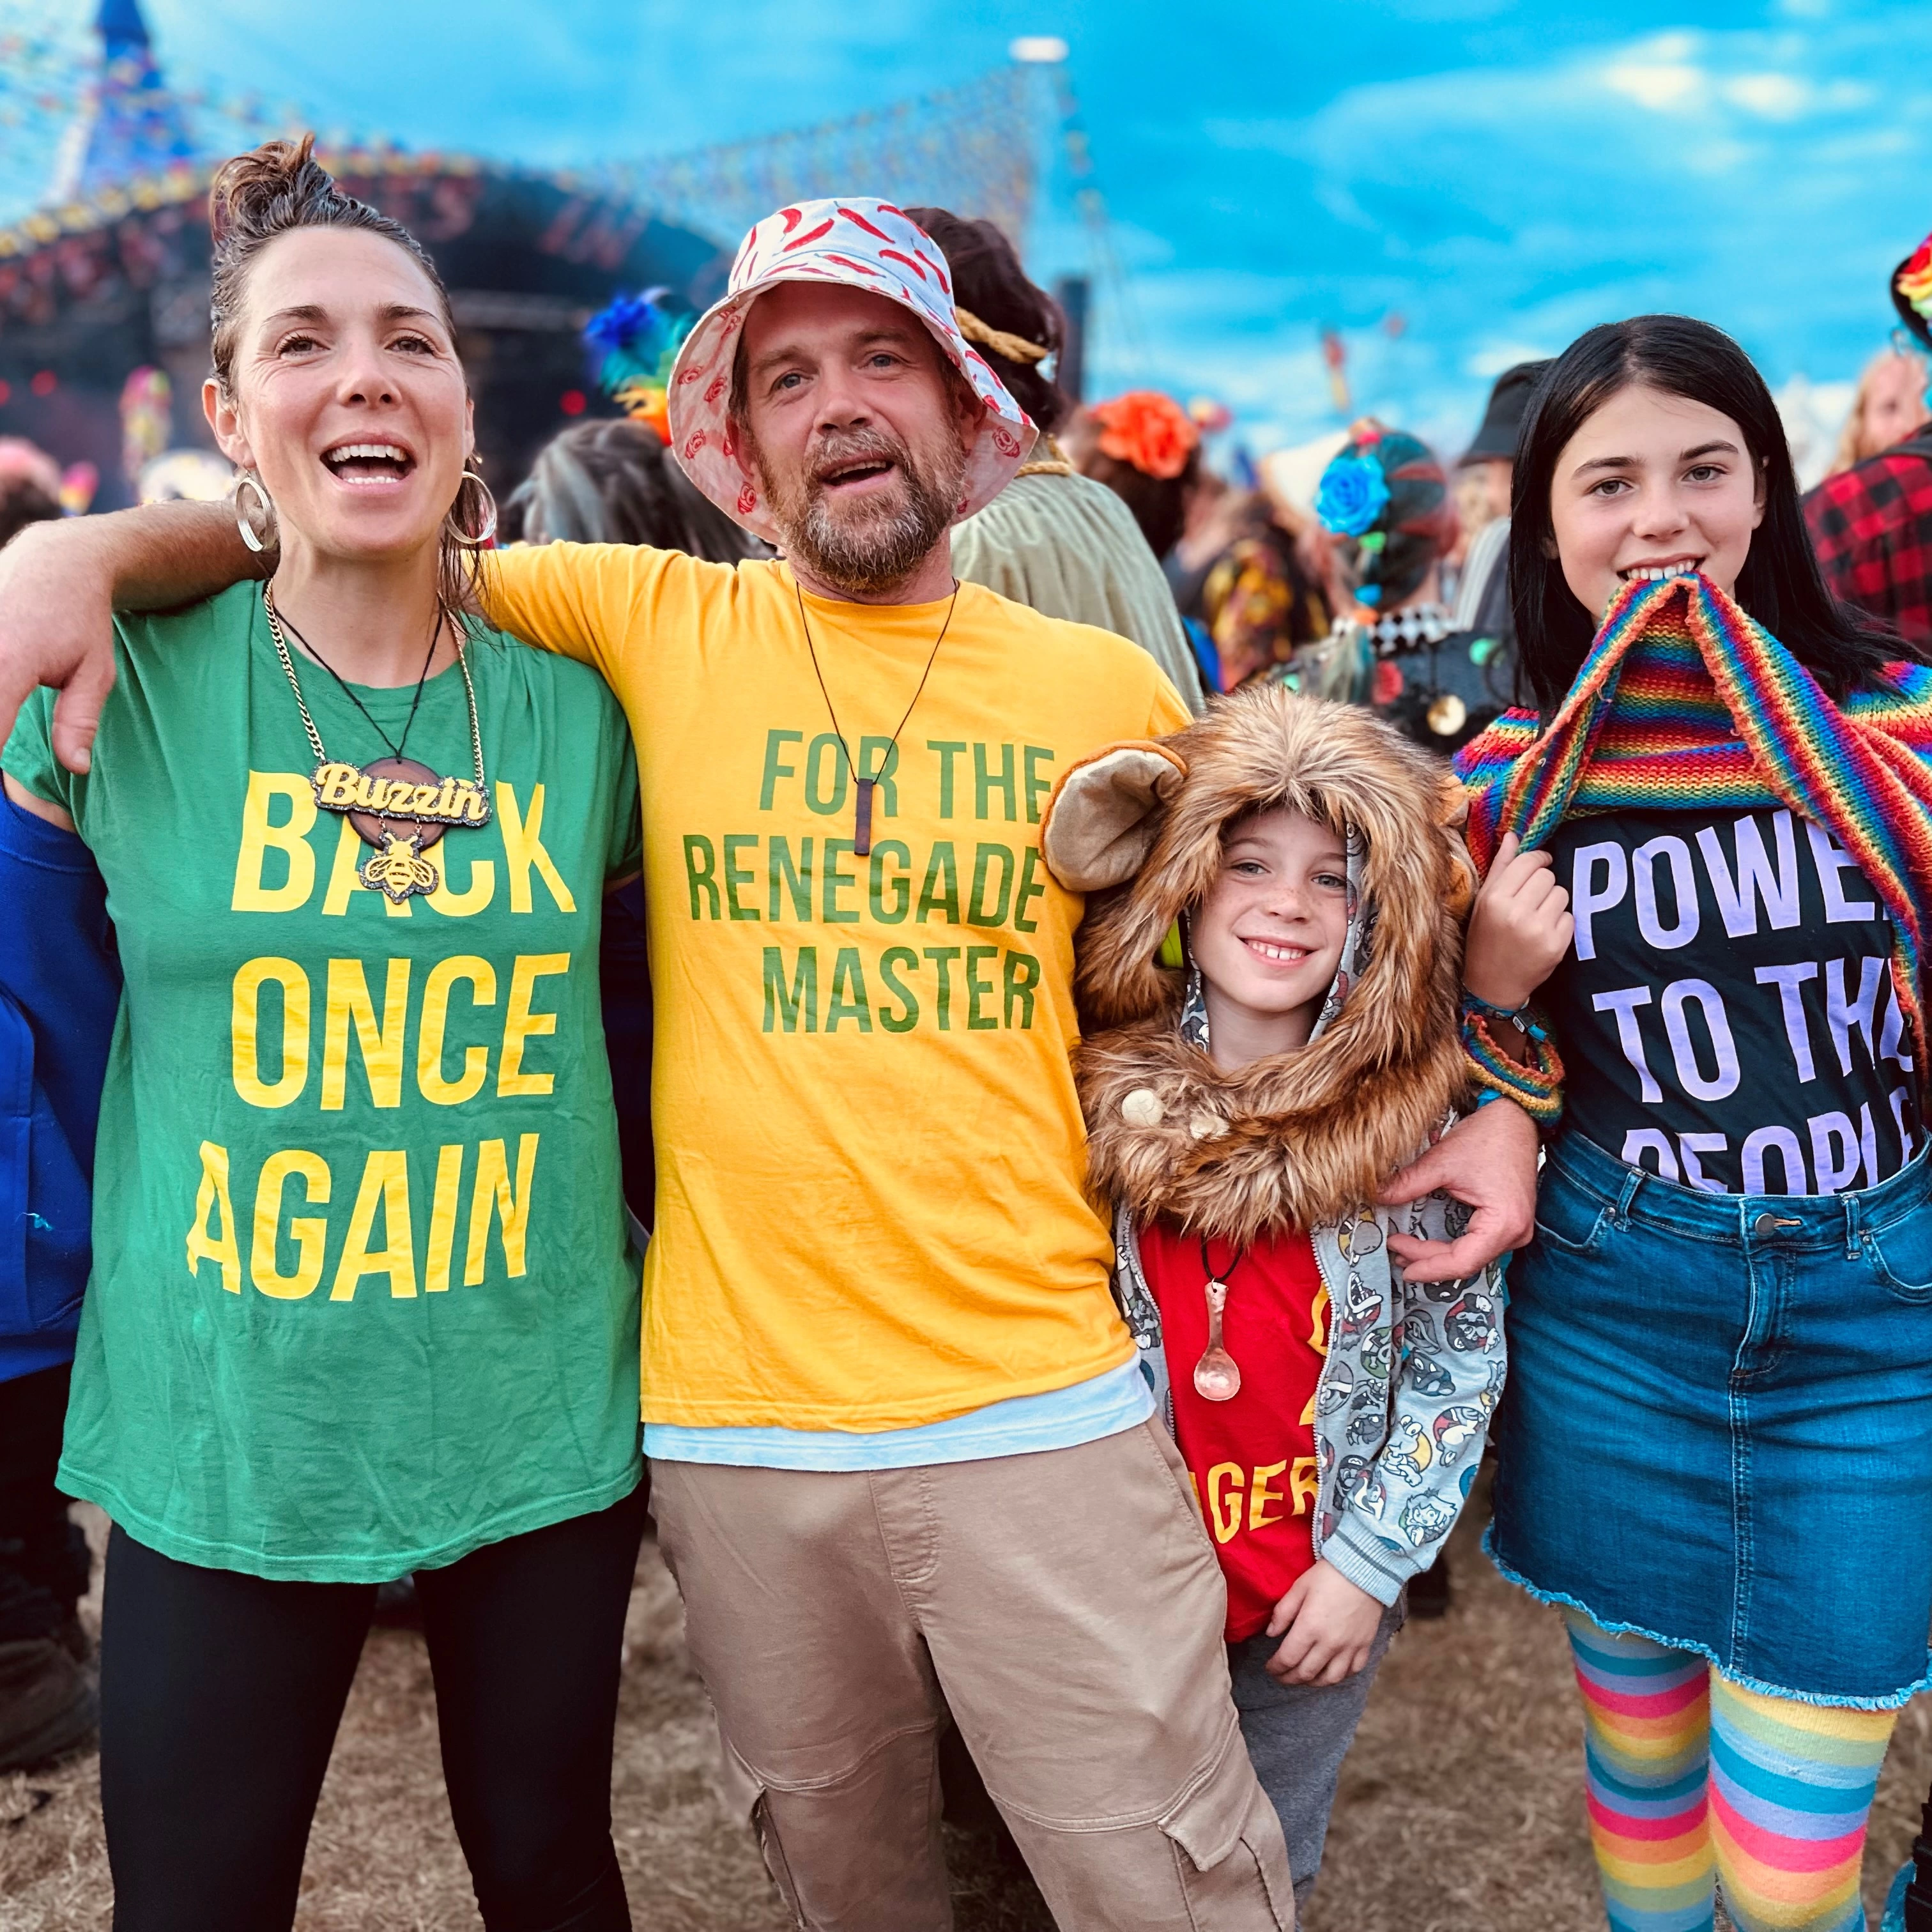 Picture of Muti the founder of Muti with his wife & two kids at a festival wearing their family shirts that read "Back Once again" "For the renegade master" "D for Damager" & "Power to the people"